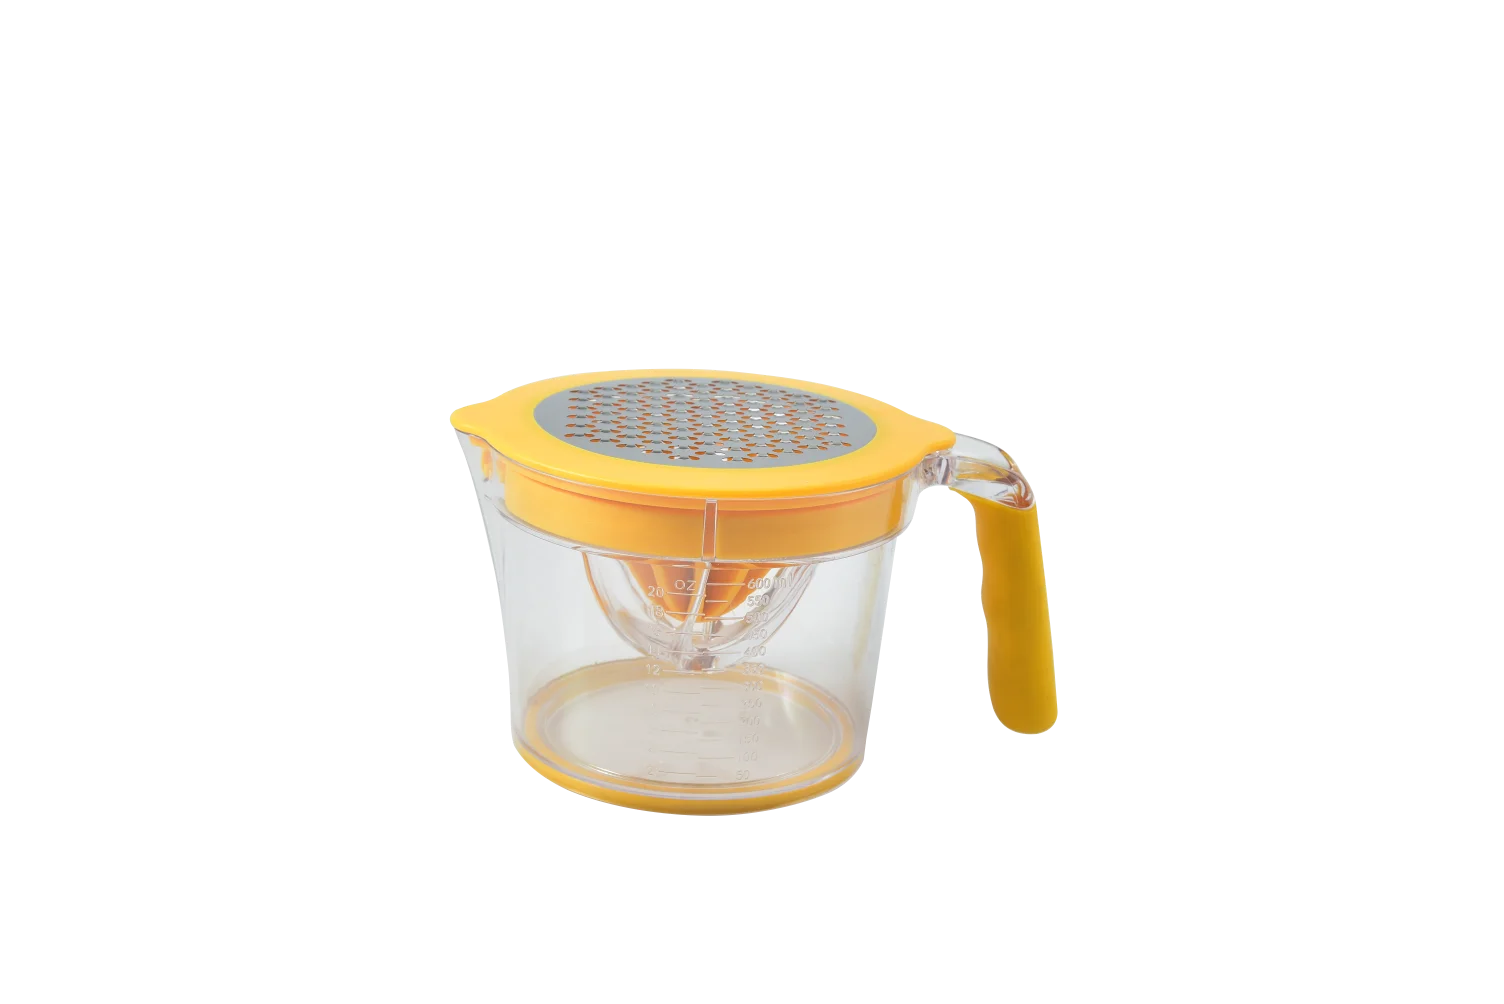 
Hot Selling Kitchen Portable Useful Multi-function Hand Operated Press Squeezer Fruit Citrus Orange Manual Juicer 